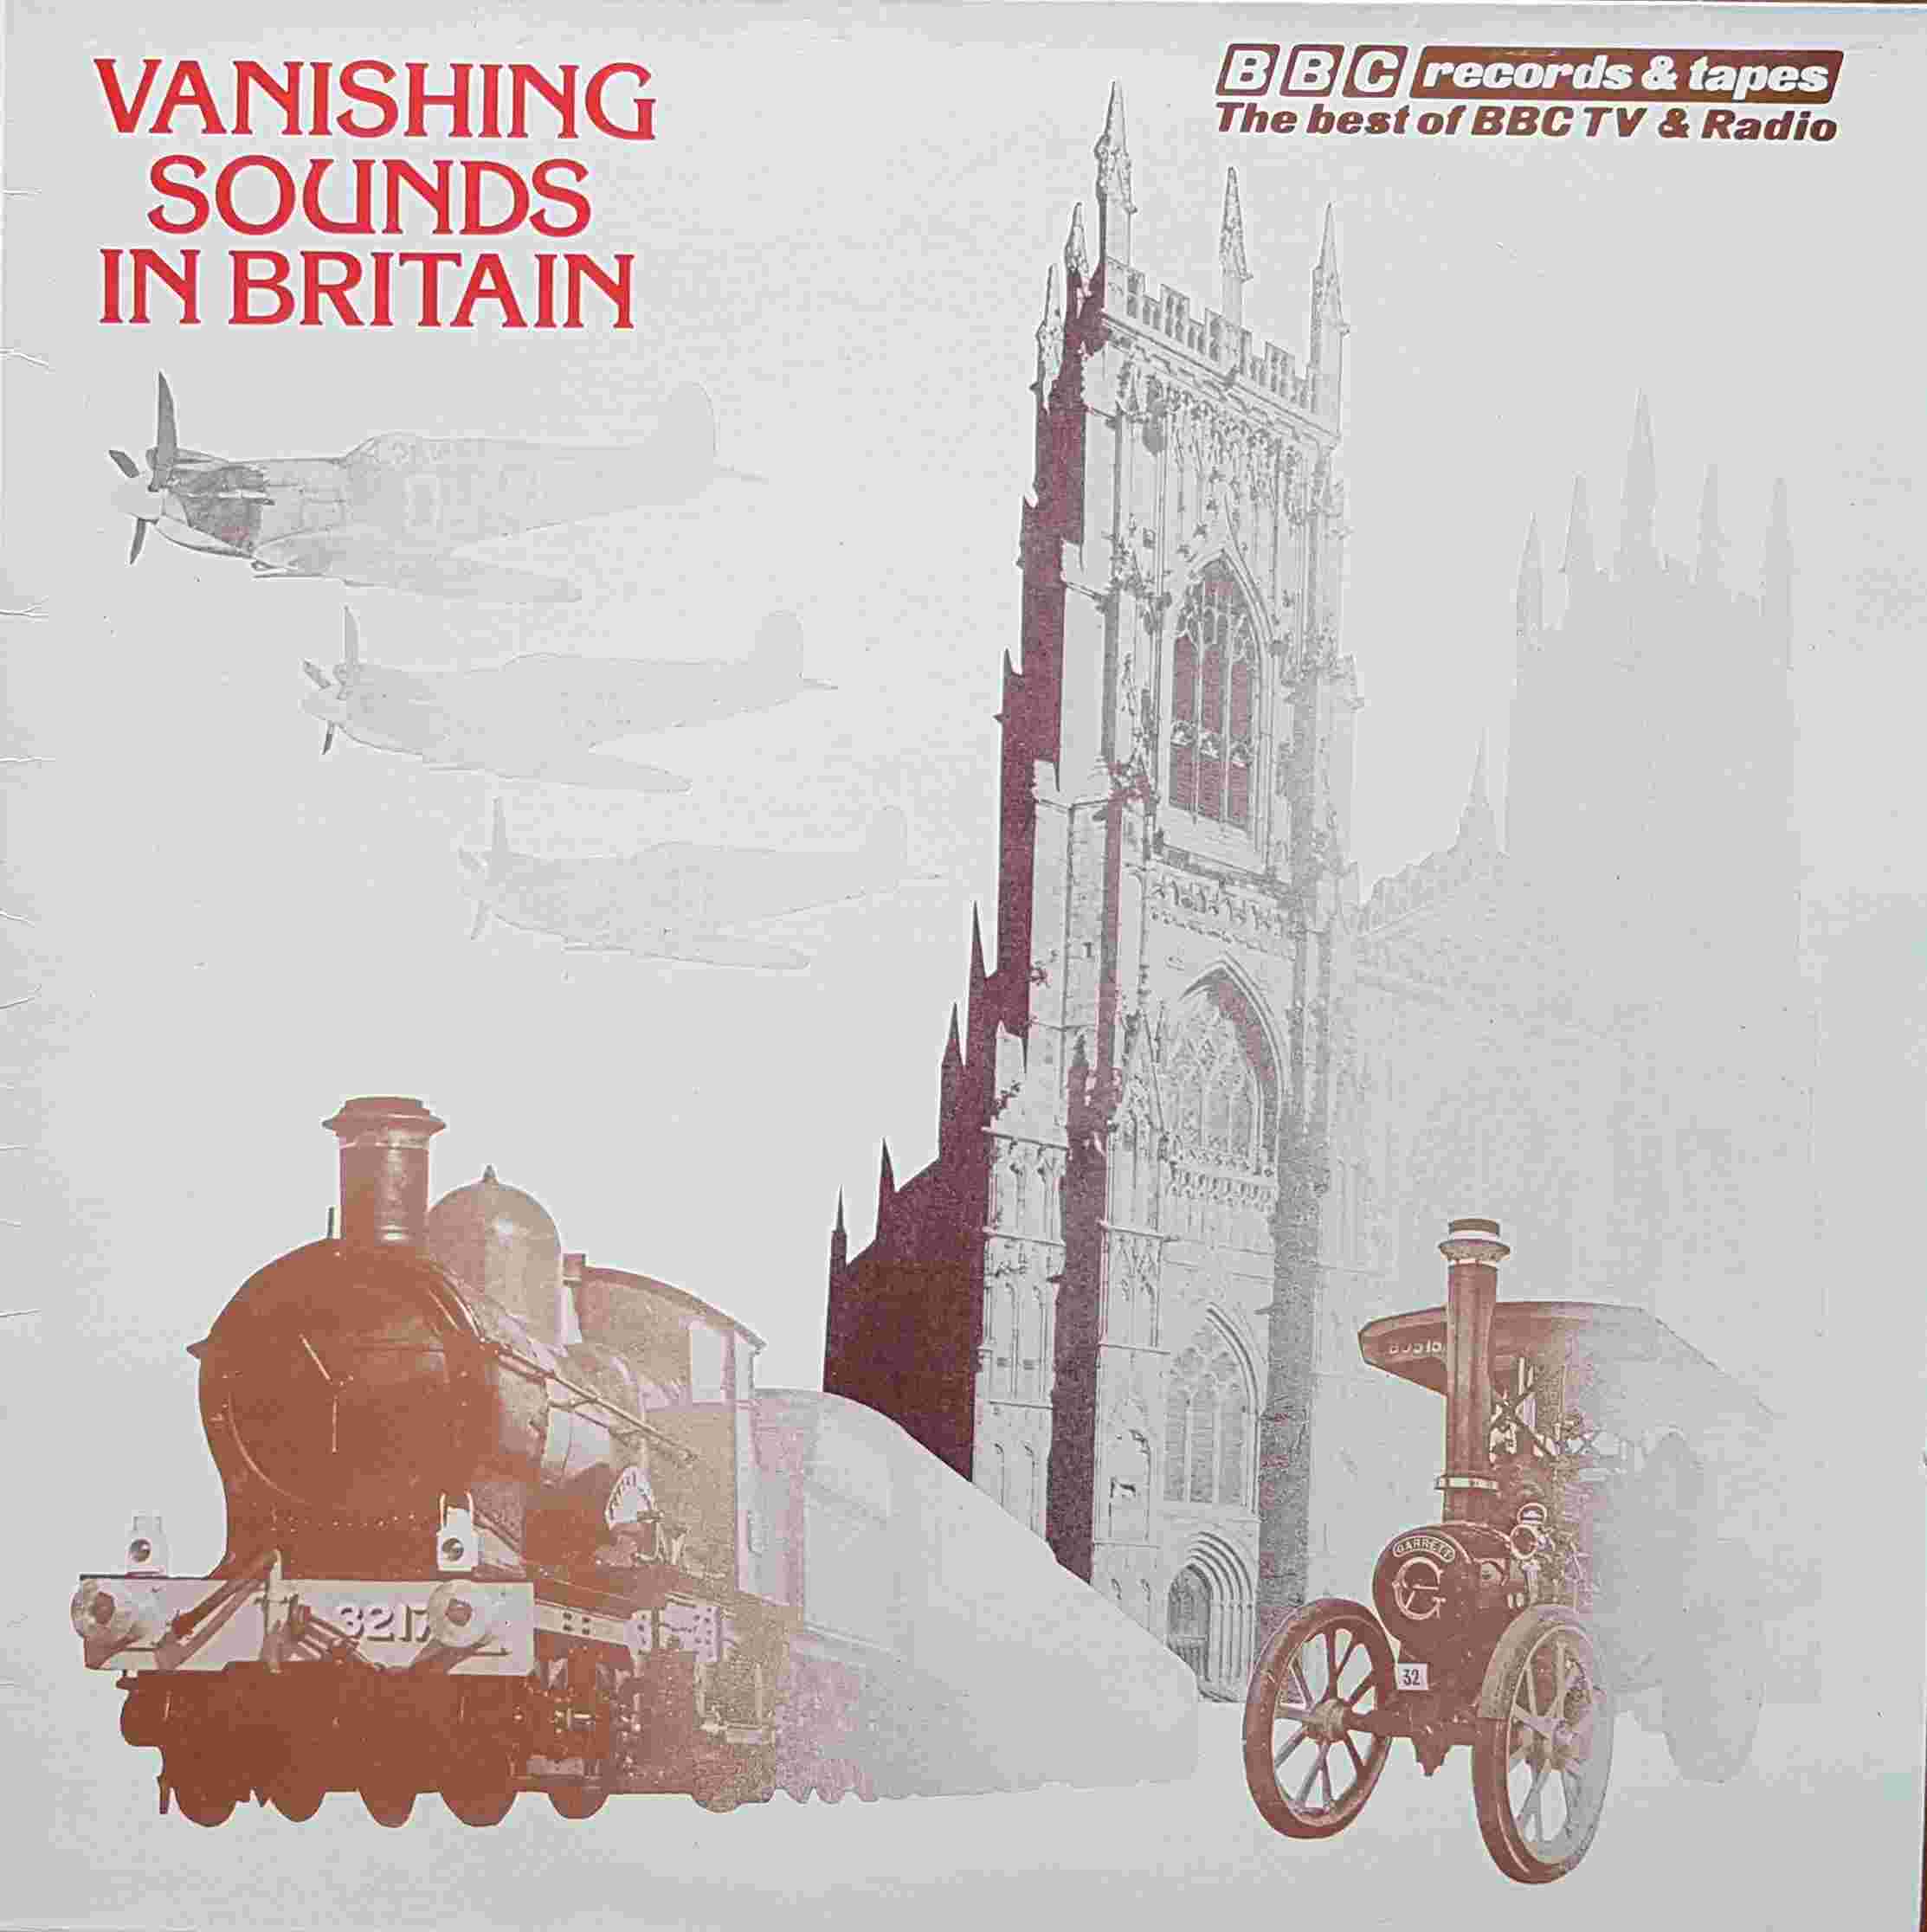 Picture of REC 227 Vanishing sounds of Britain (Sound effects no. 12) by artist Various from the BBC albums - Records and Tapes library